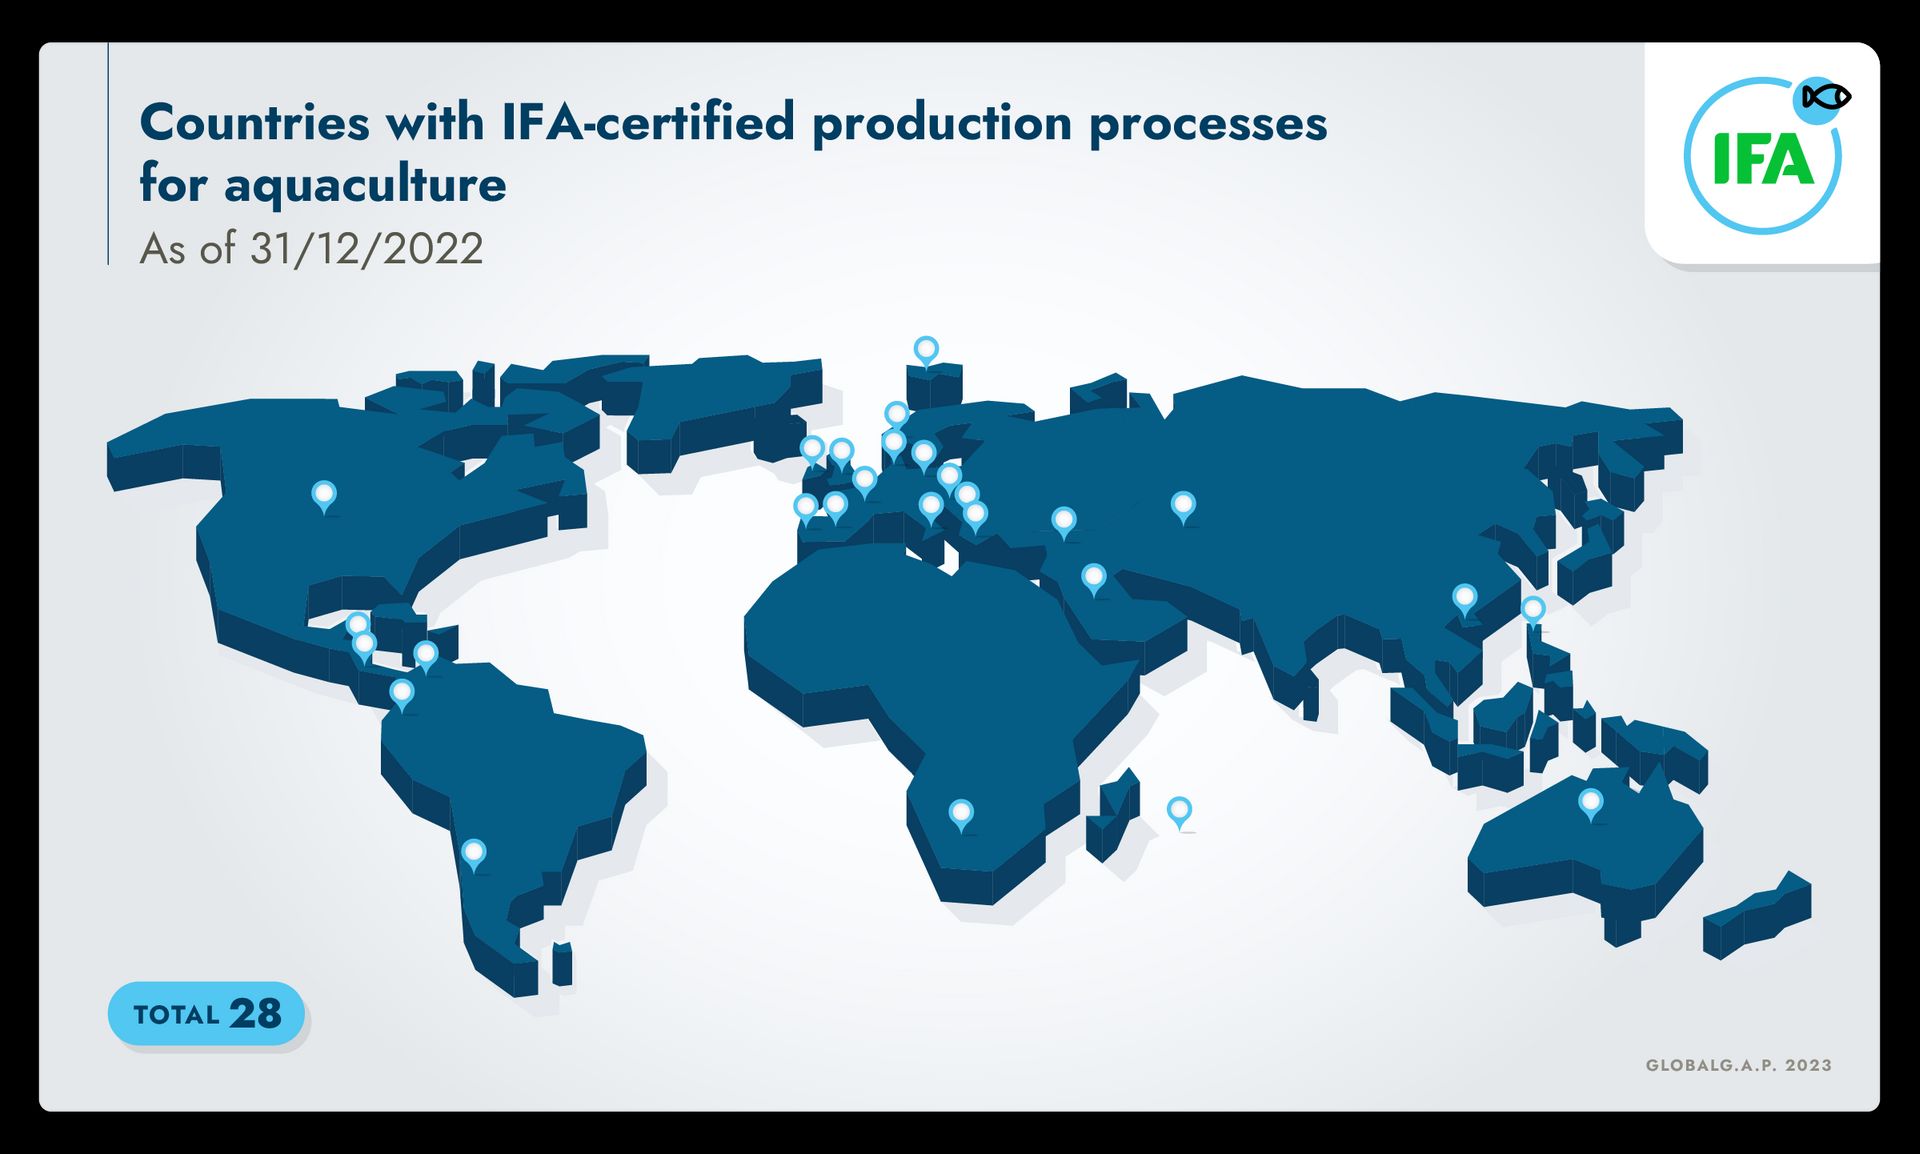 Infographic of a world map identifying countries with Integrated Farm Assurance certified production processes for aquaculture